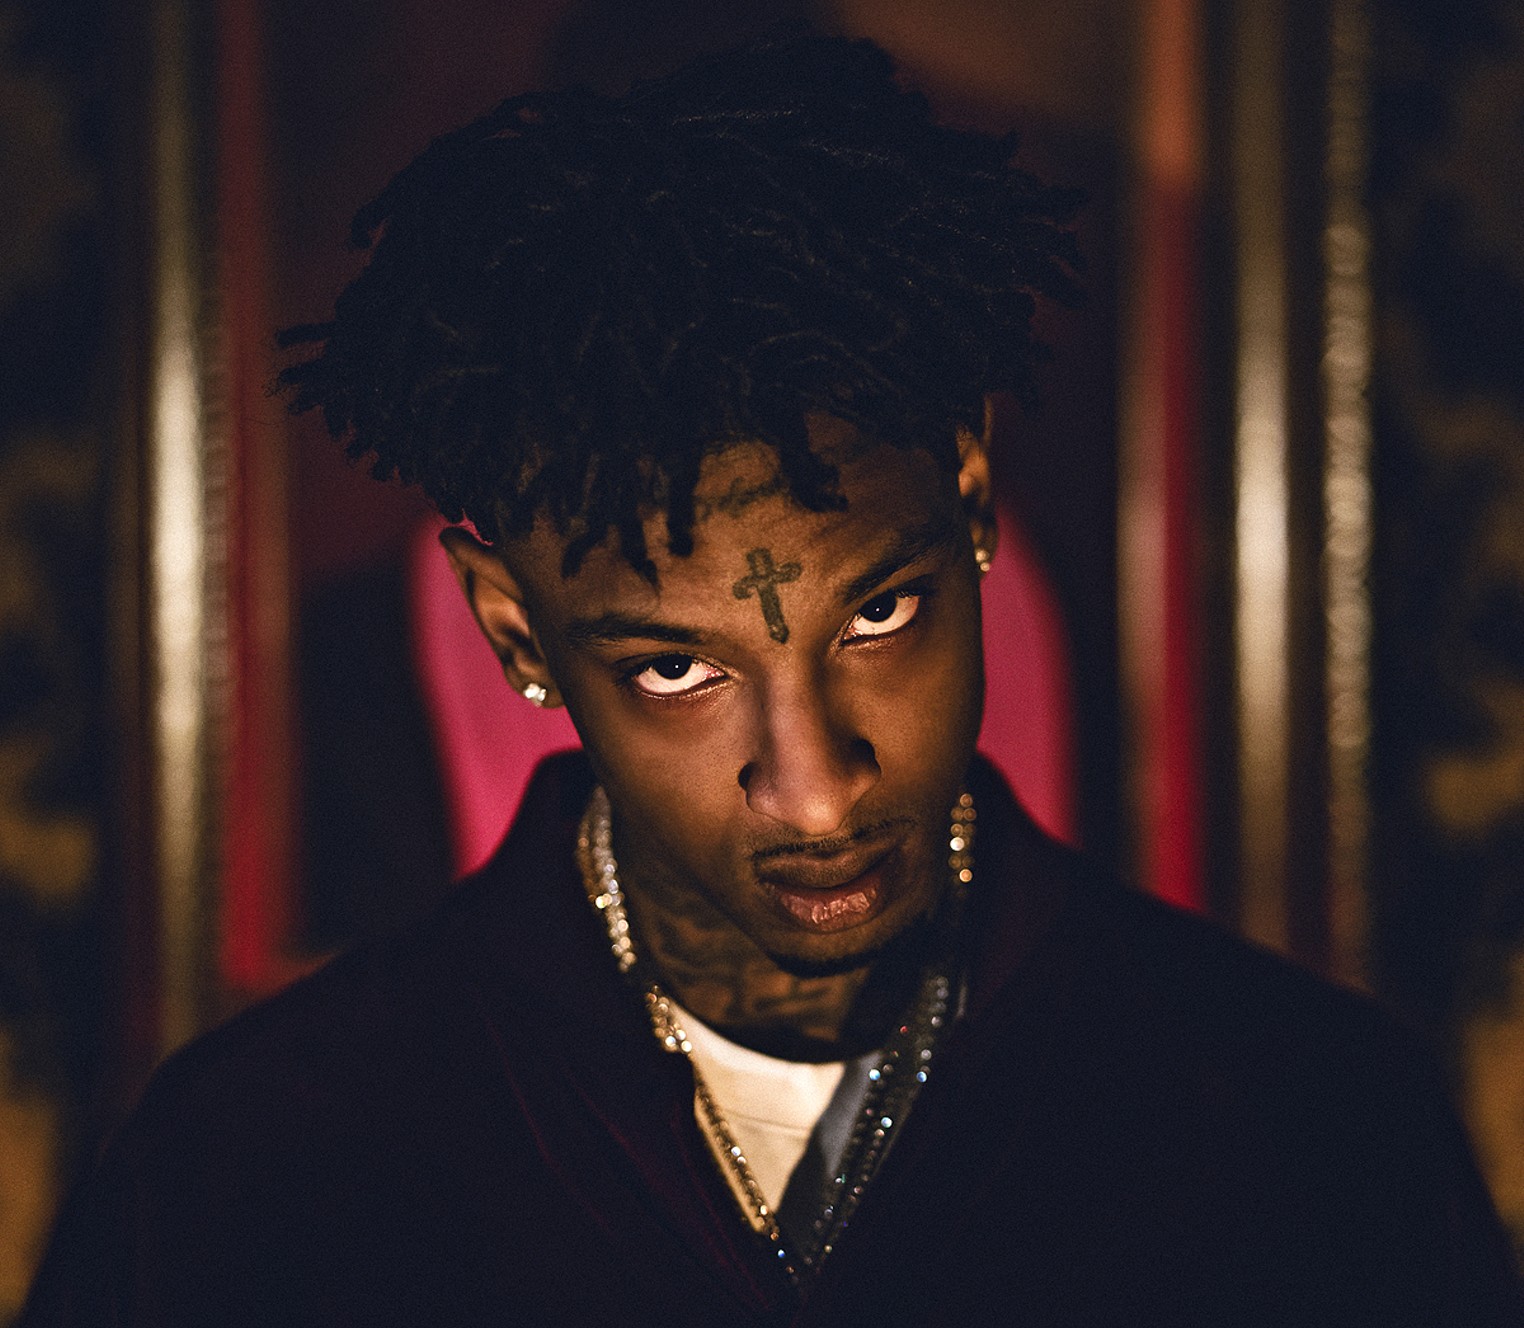 21 Savage, American Rapper - The New York Times